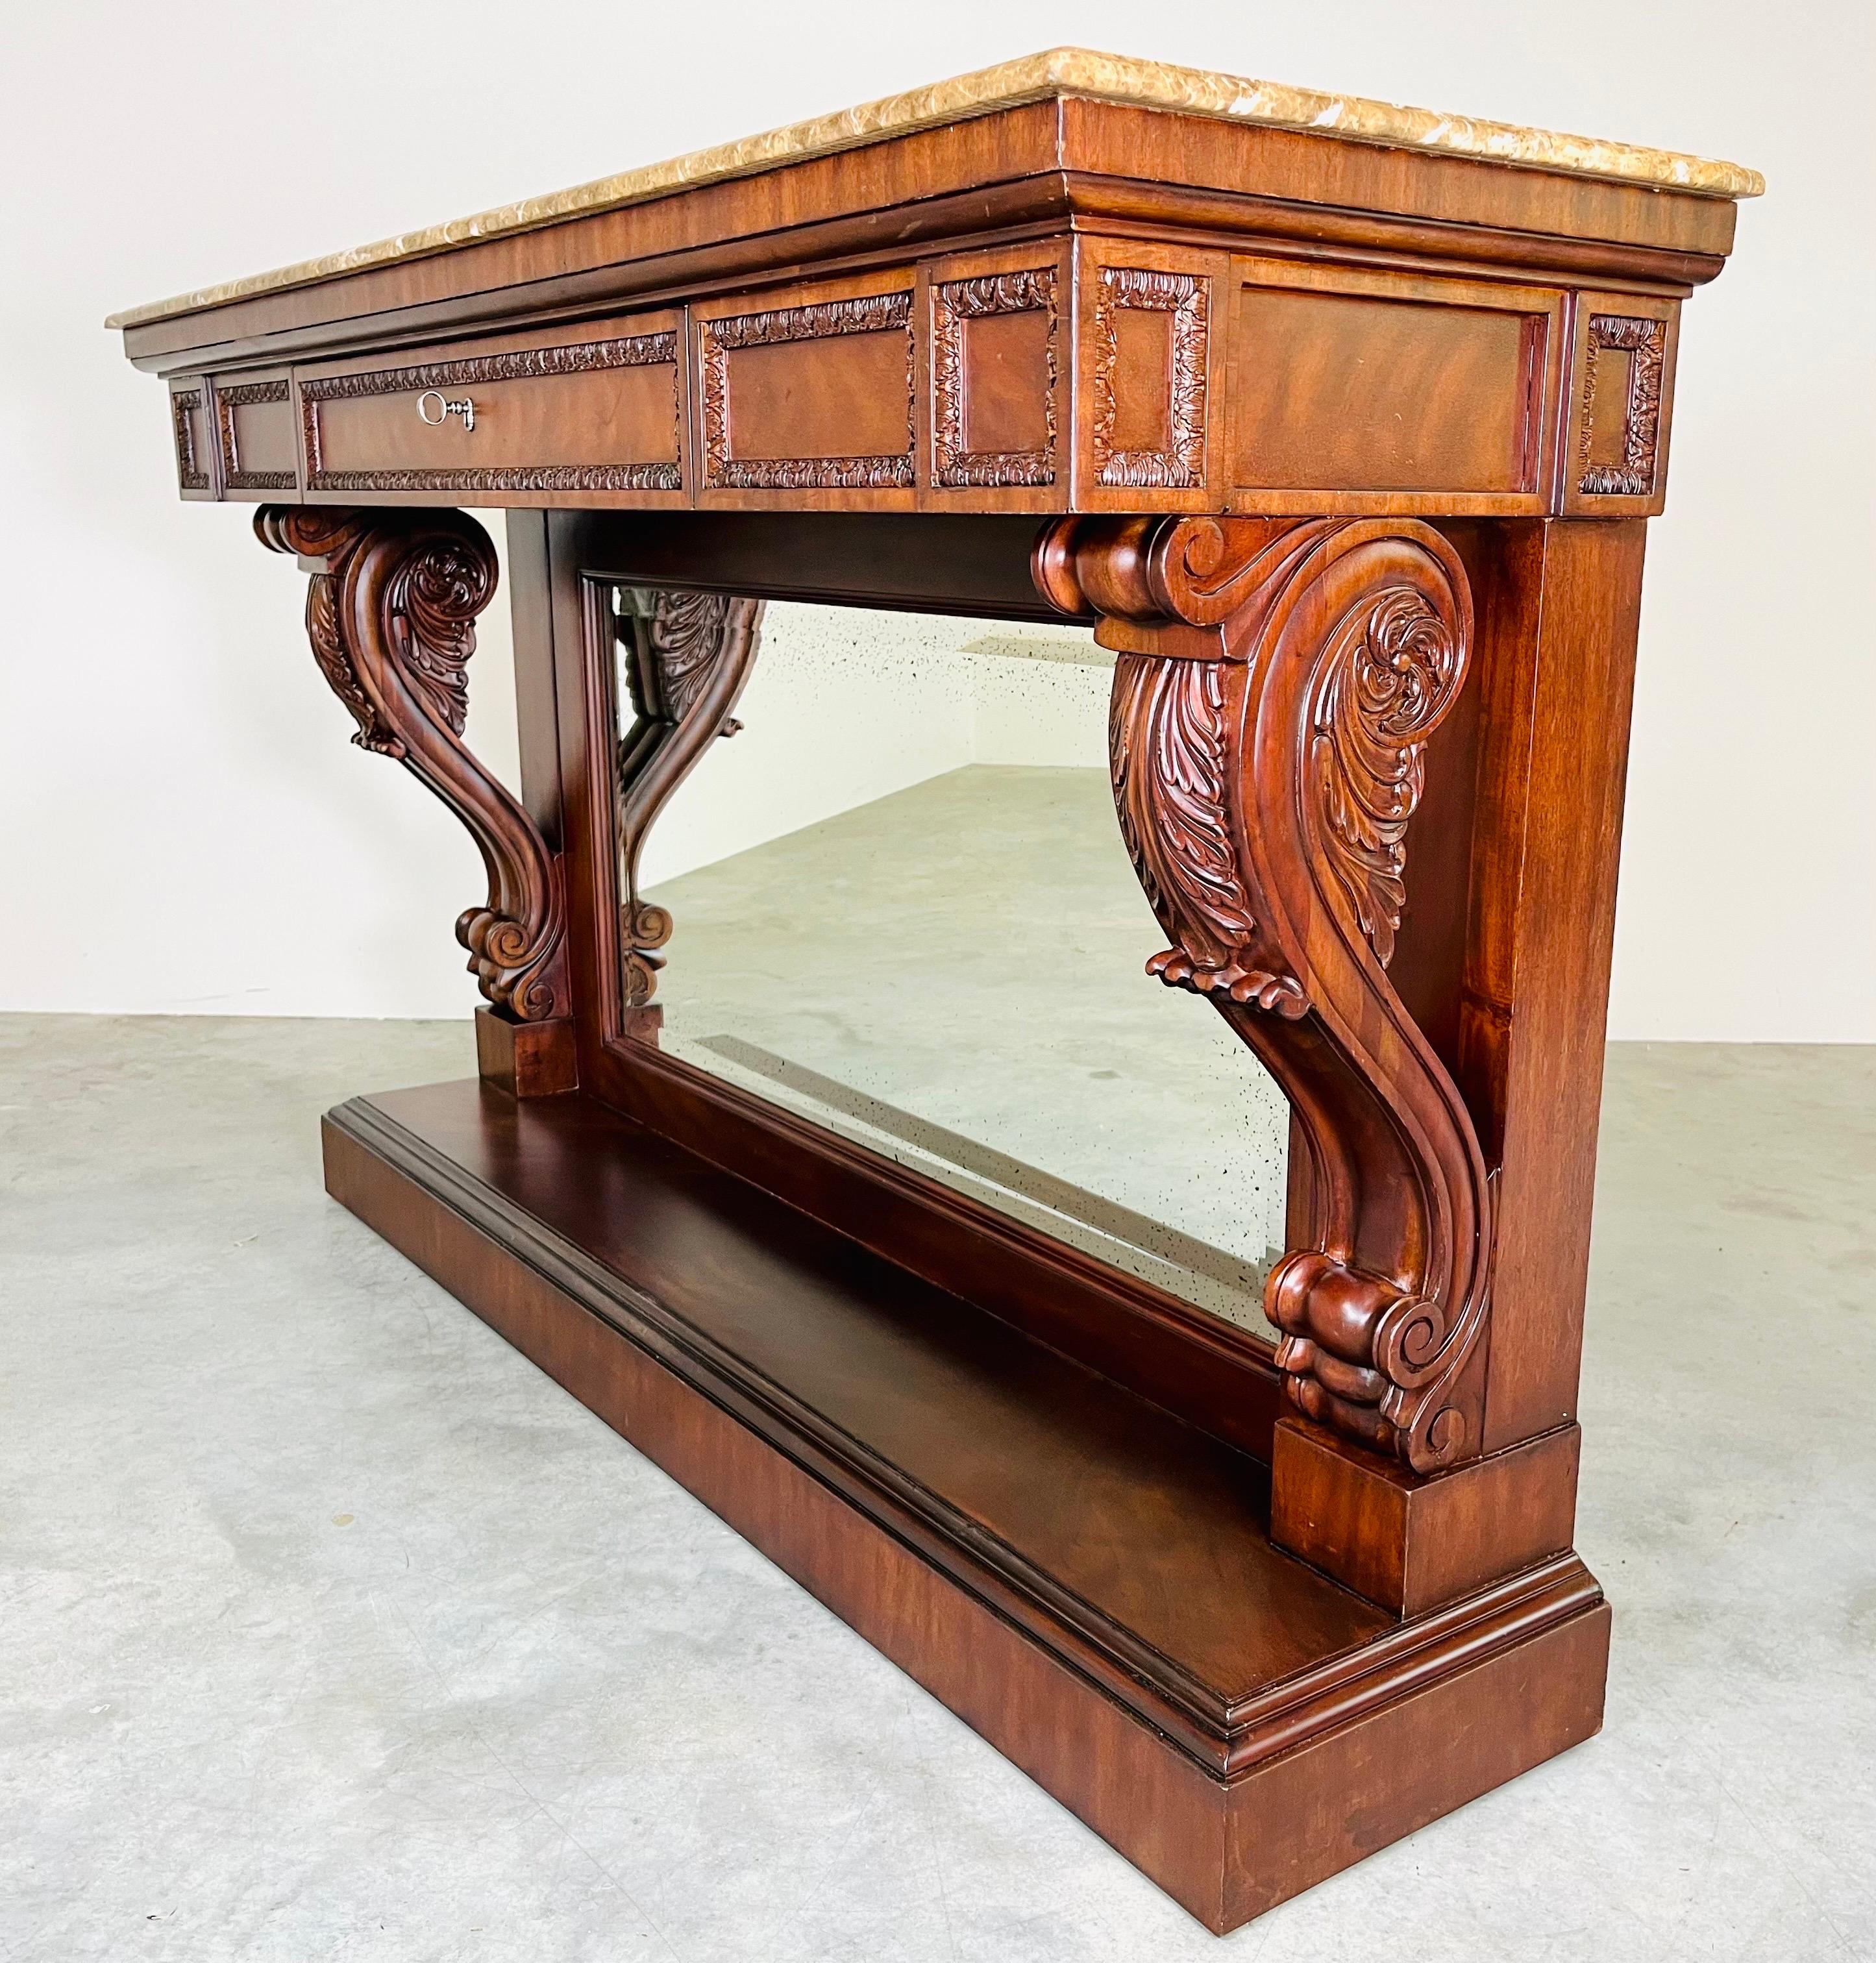 A stunning console or hallway table having Italian marble top, antiqued mirror center and carved mahogany throughout by Ralph Lauren Fine Furniture. Console features a locking center drawer with heavy steel key and durable lock. Stunning details